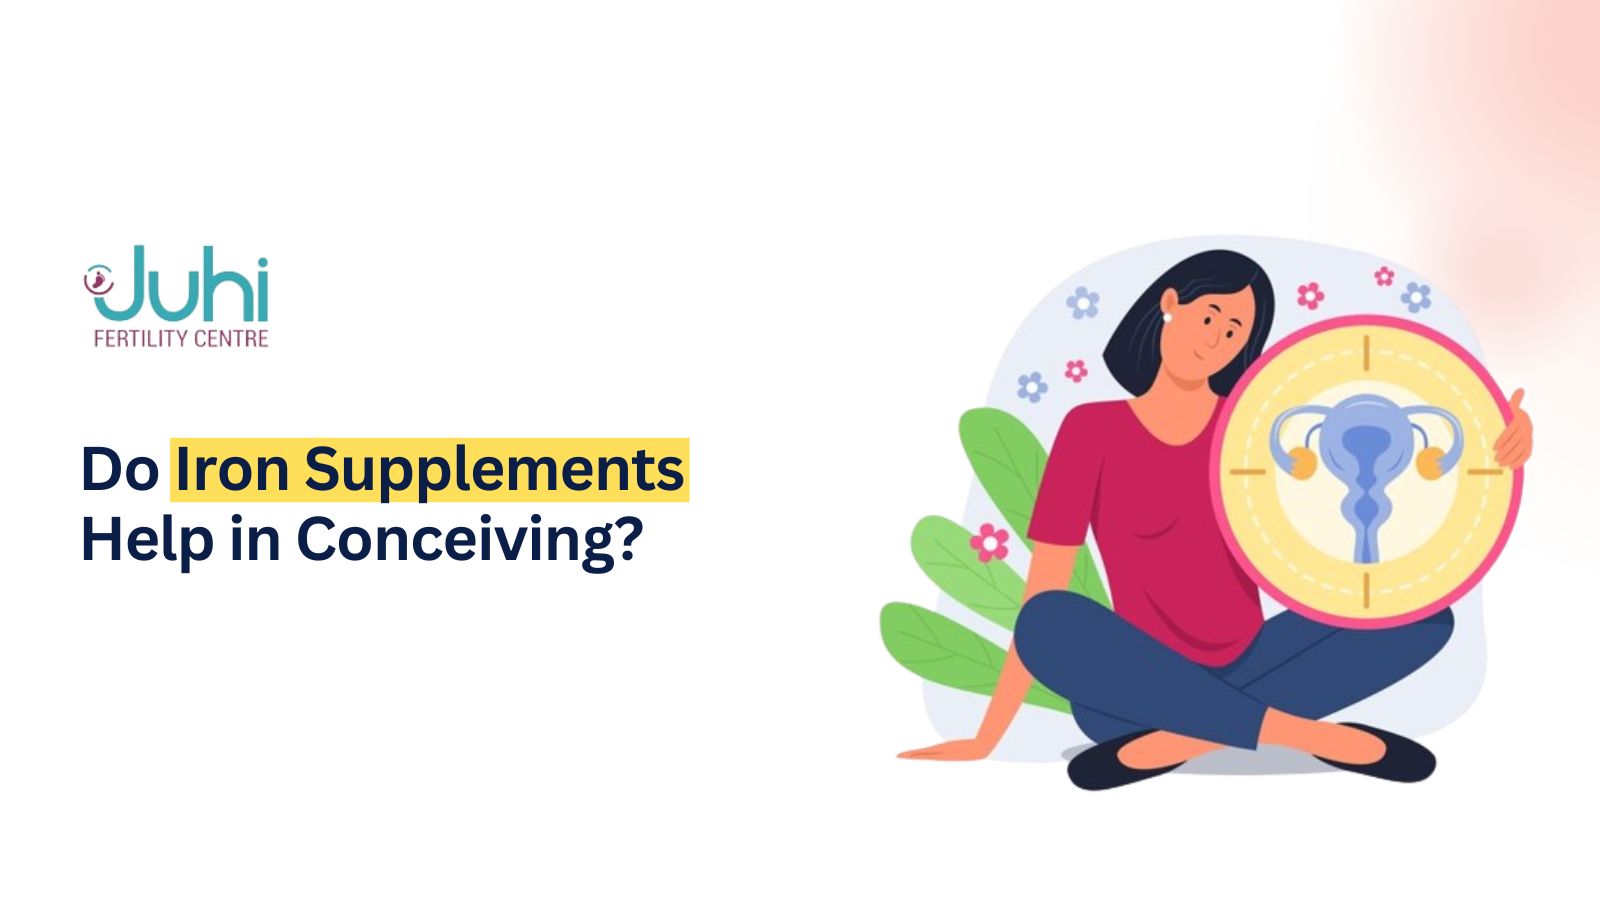 Do Iron Supplements Help in Conceiving?